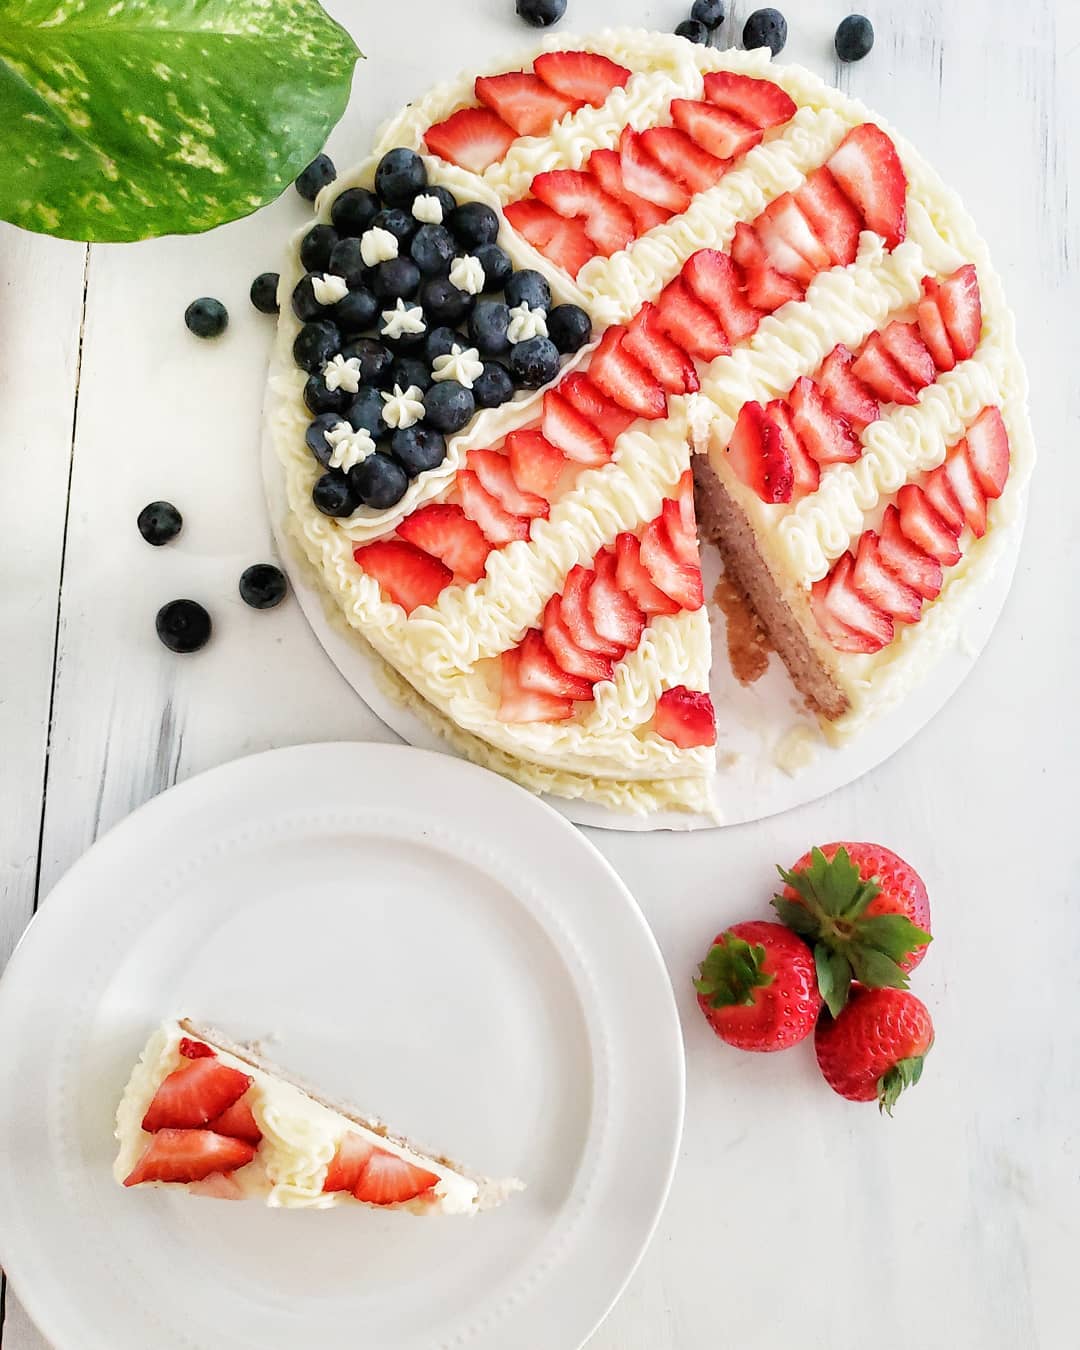 American Flag Style Cake make with Berries. Photo by Instagram user @proseccotopeaches